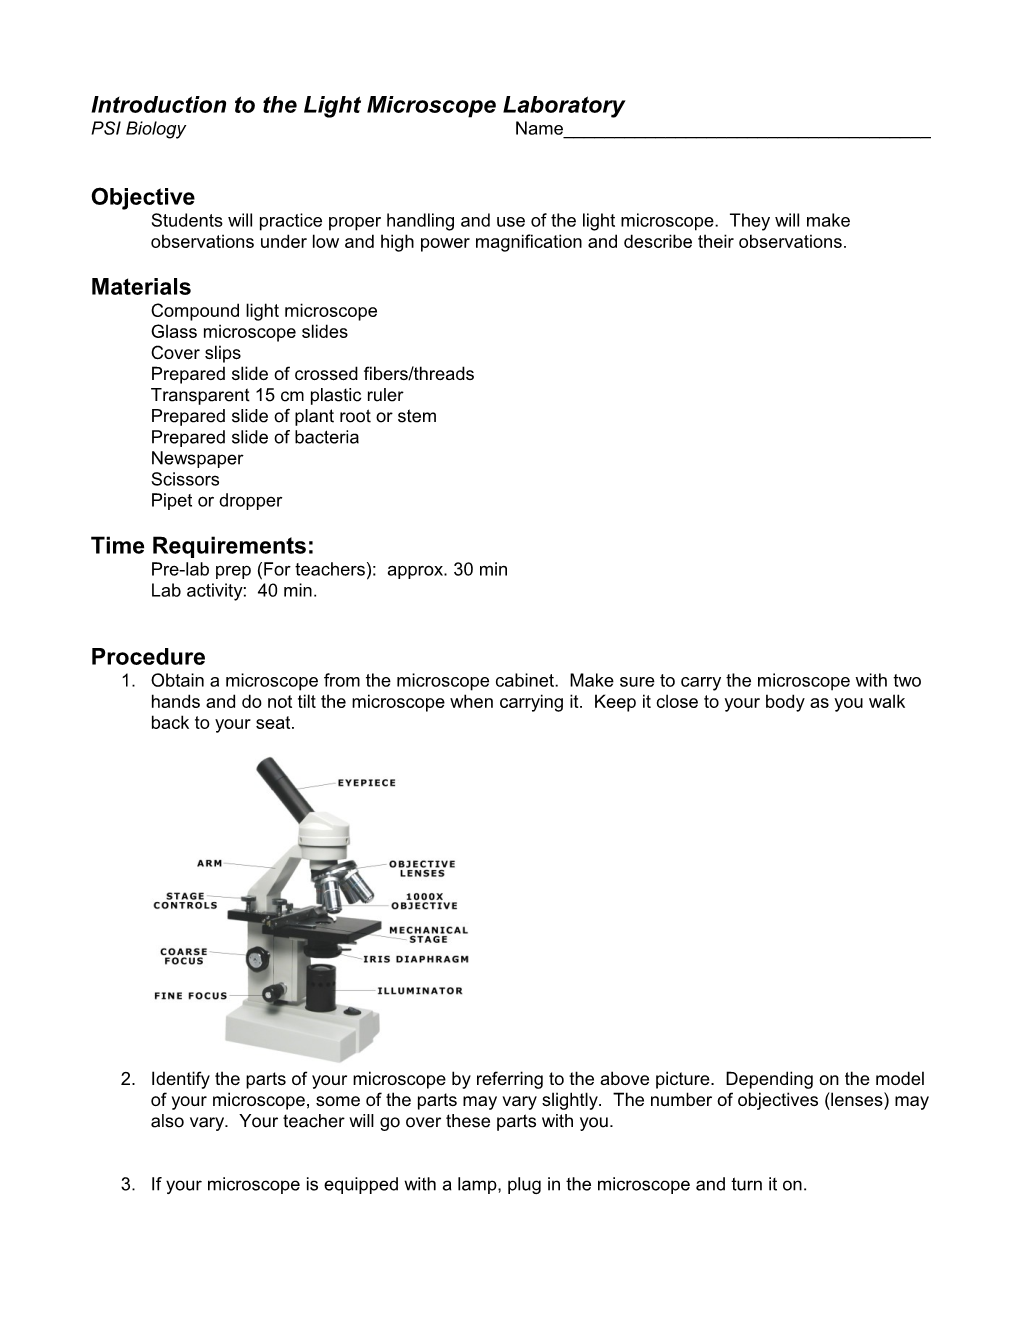 Introduction to the Light Microscope Laboratory